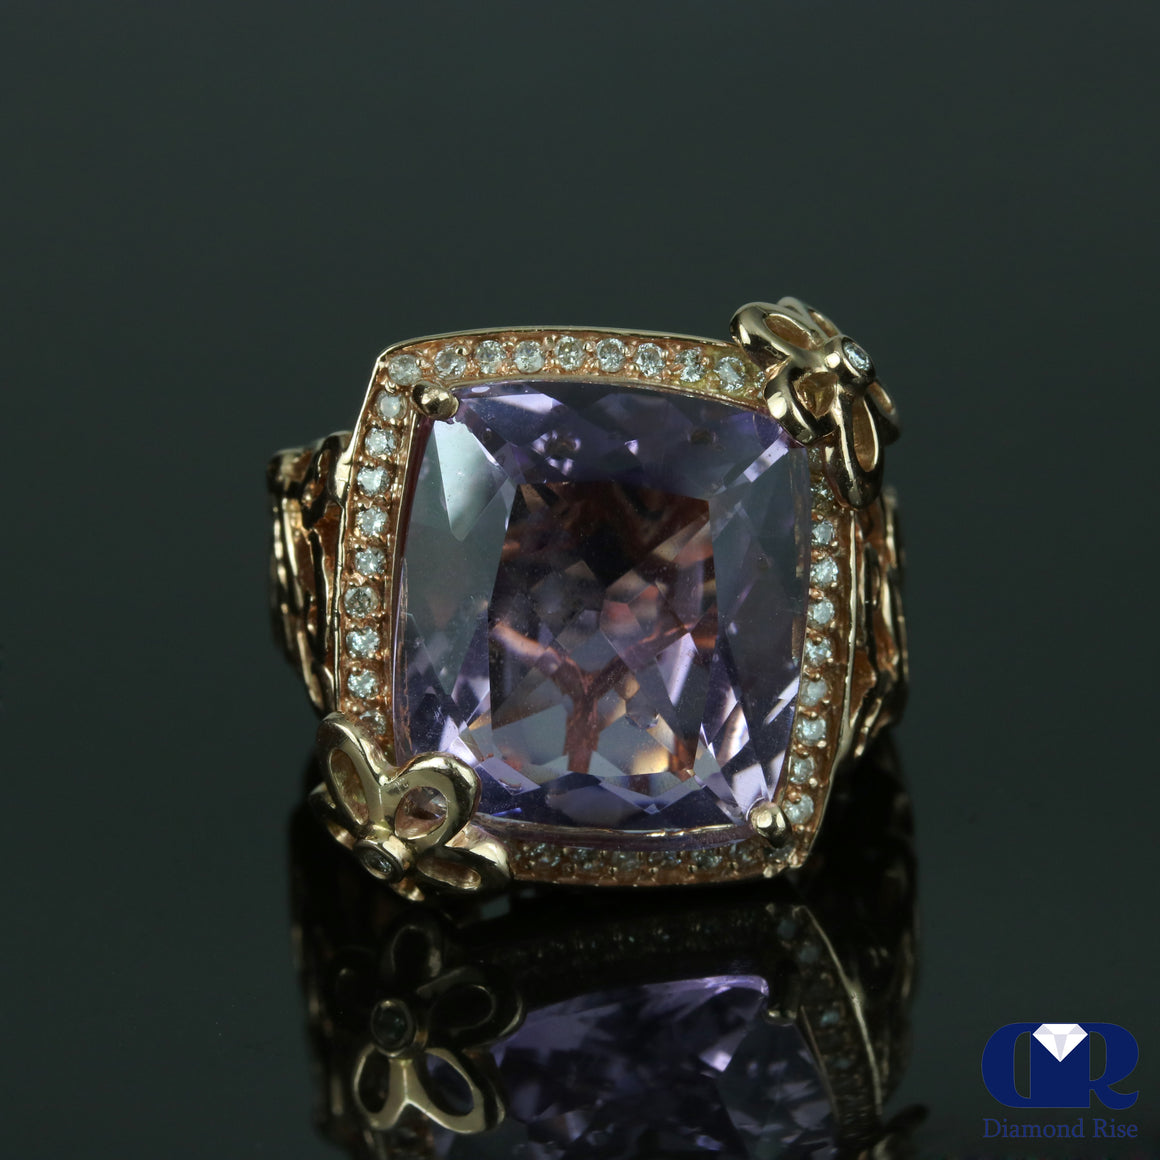 Large Diamond & Amethyst Cocktail Ring In 14K Rose Gold - Diamond Rise Jewelry